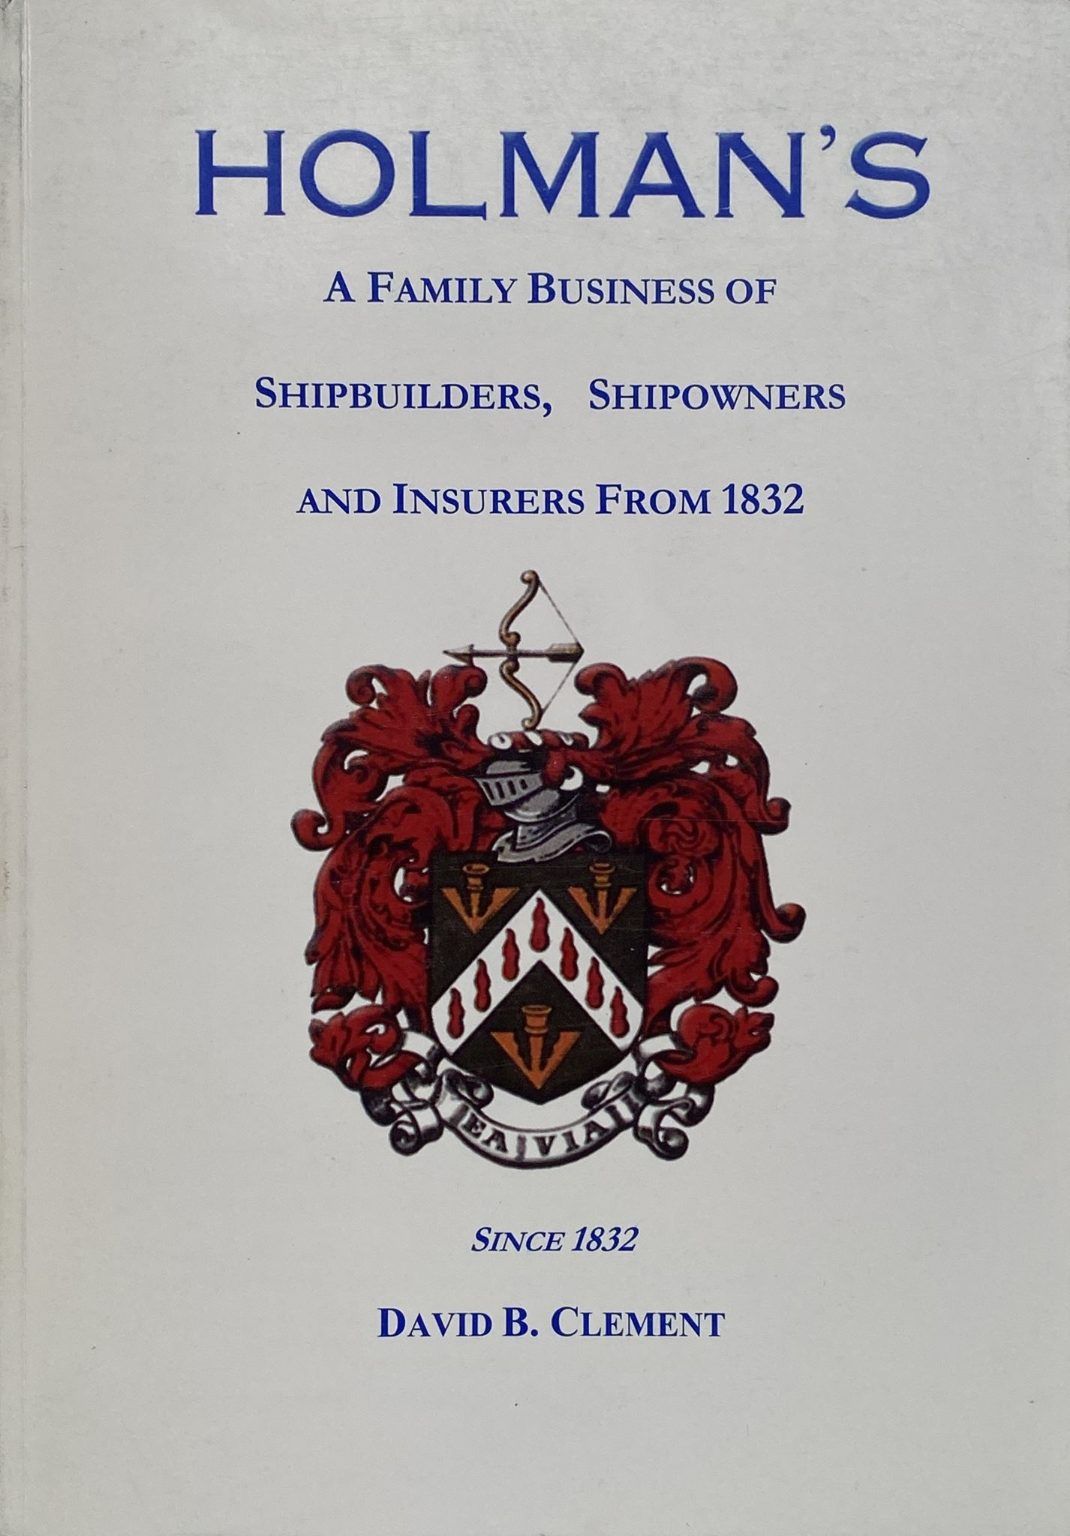 HOLMAN'S: A Family Business of Shipbuilders, Shipowners and Insurers from 1832